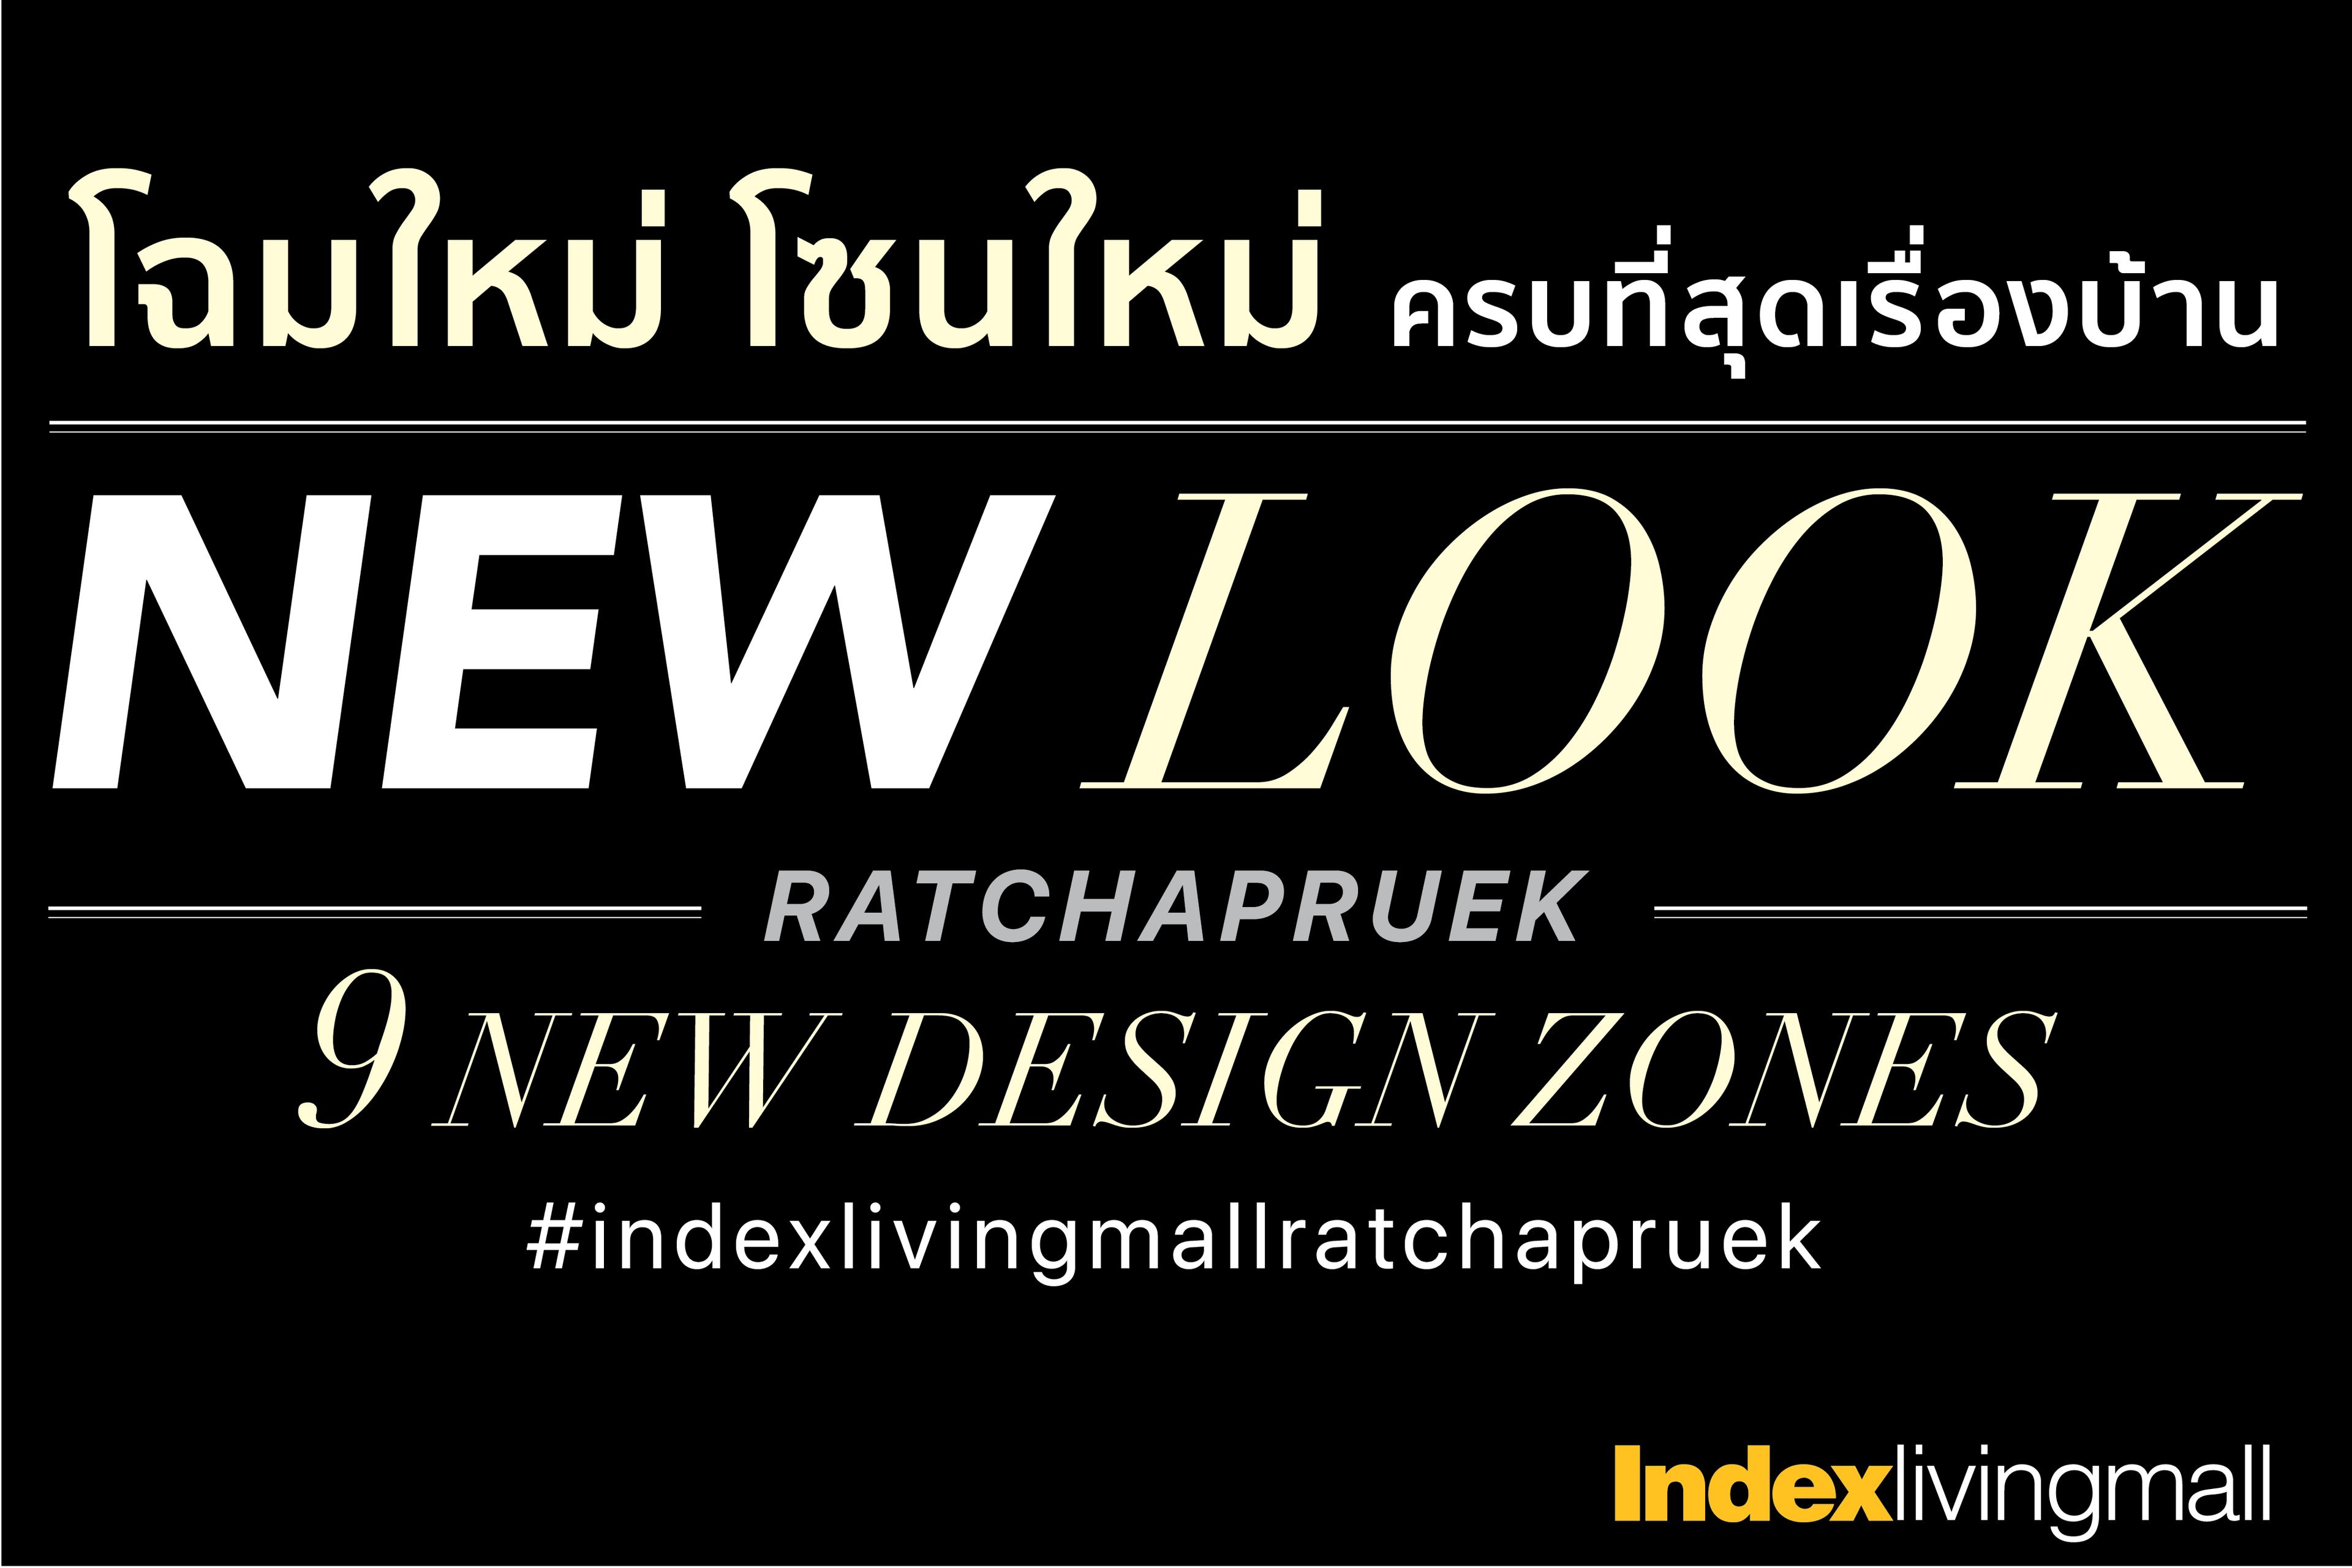 pr-news-index-living-mall-flagship-furniture-and-decor-store Image Link